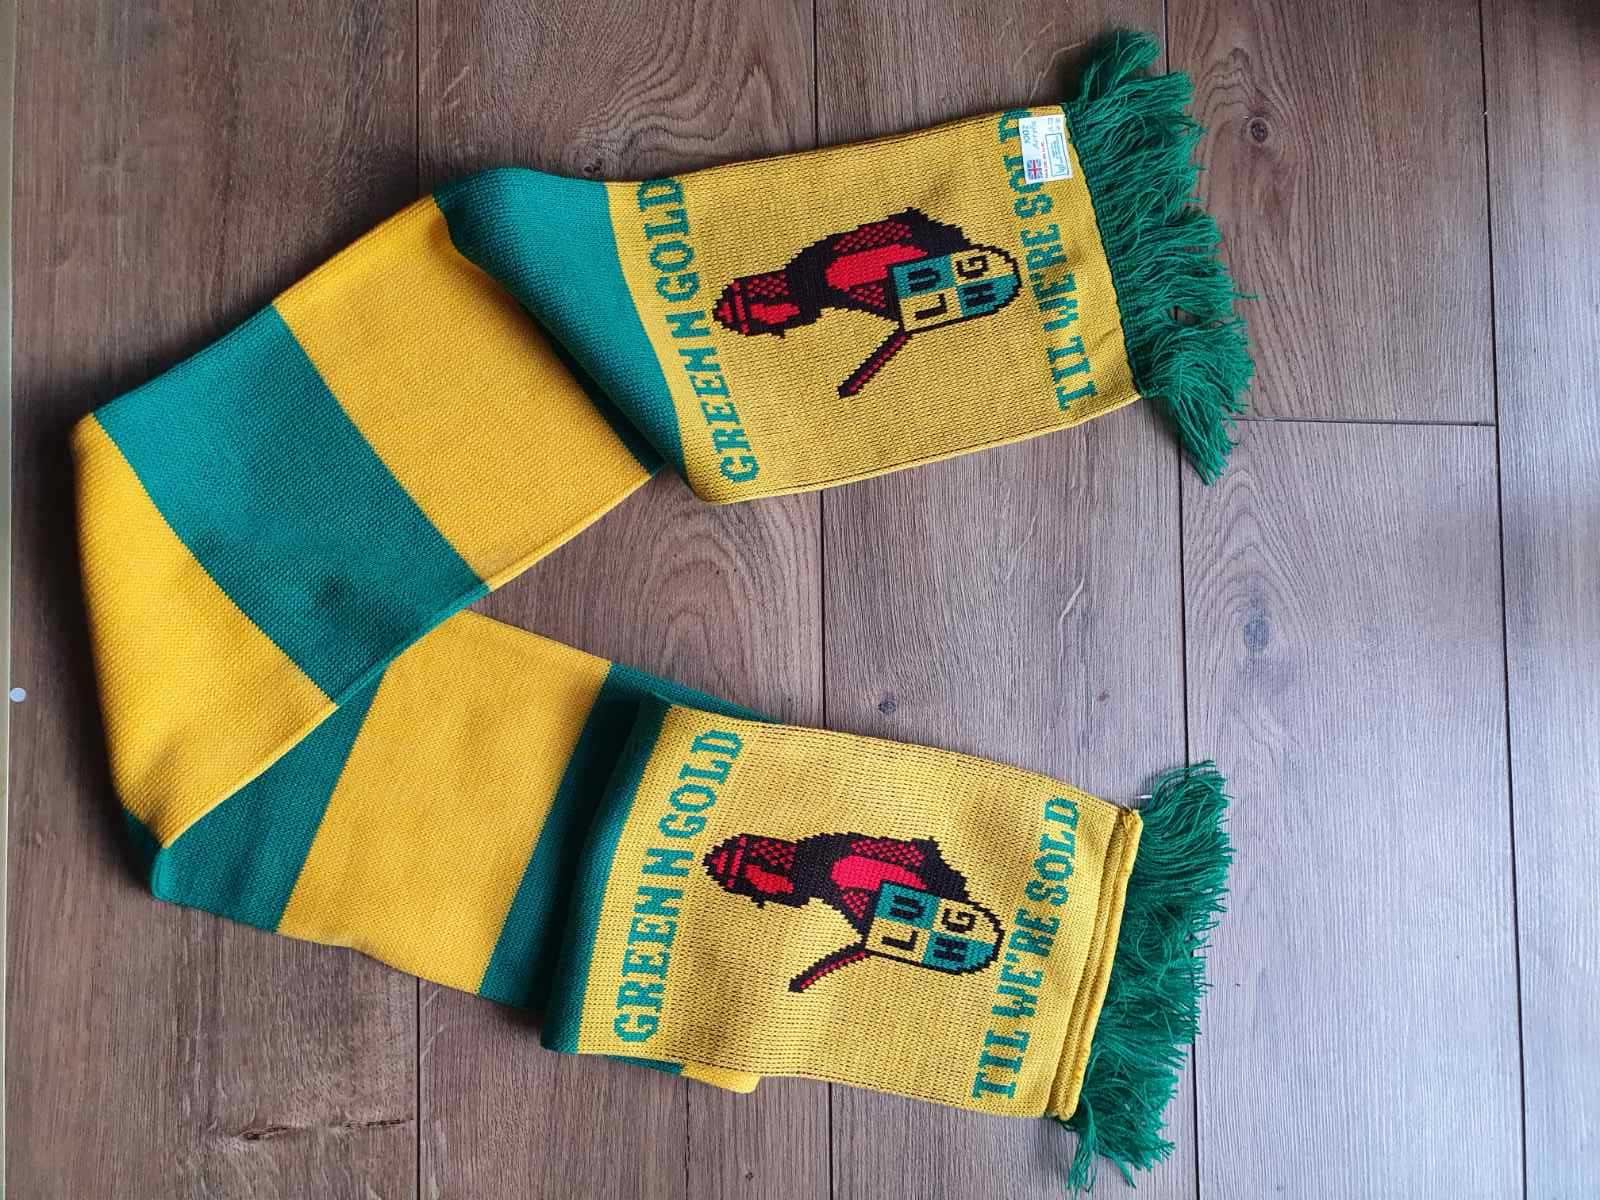 роза истор Manchester United fans Green & gold till we sold MUFC